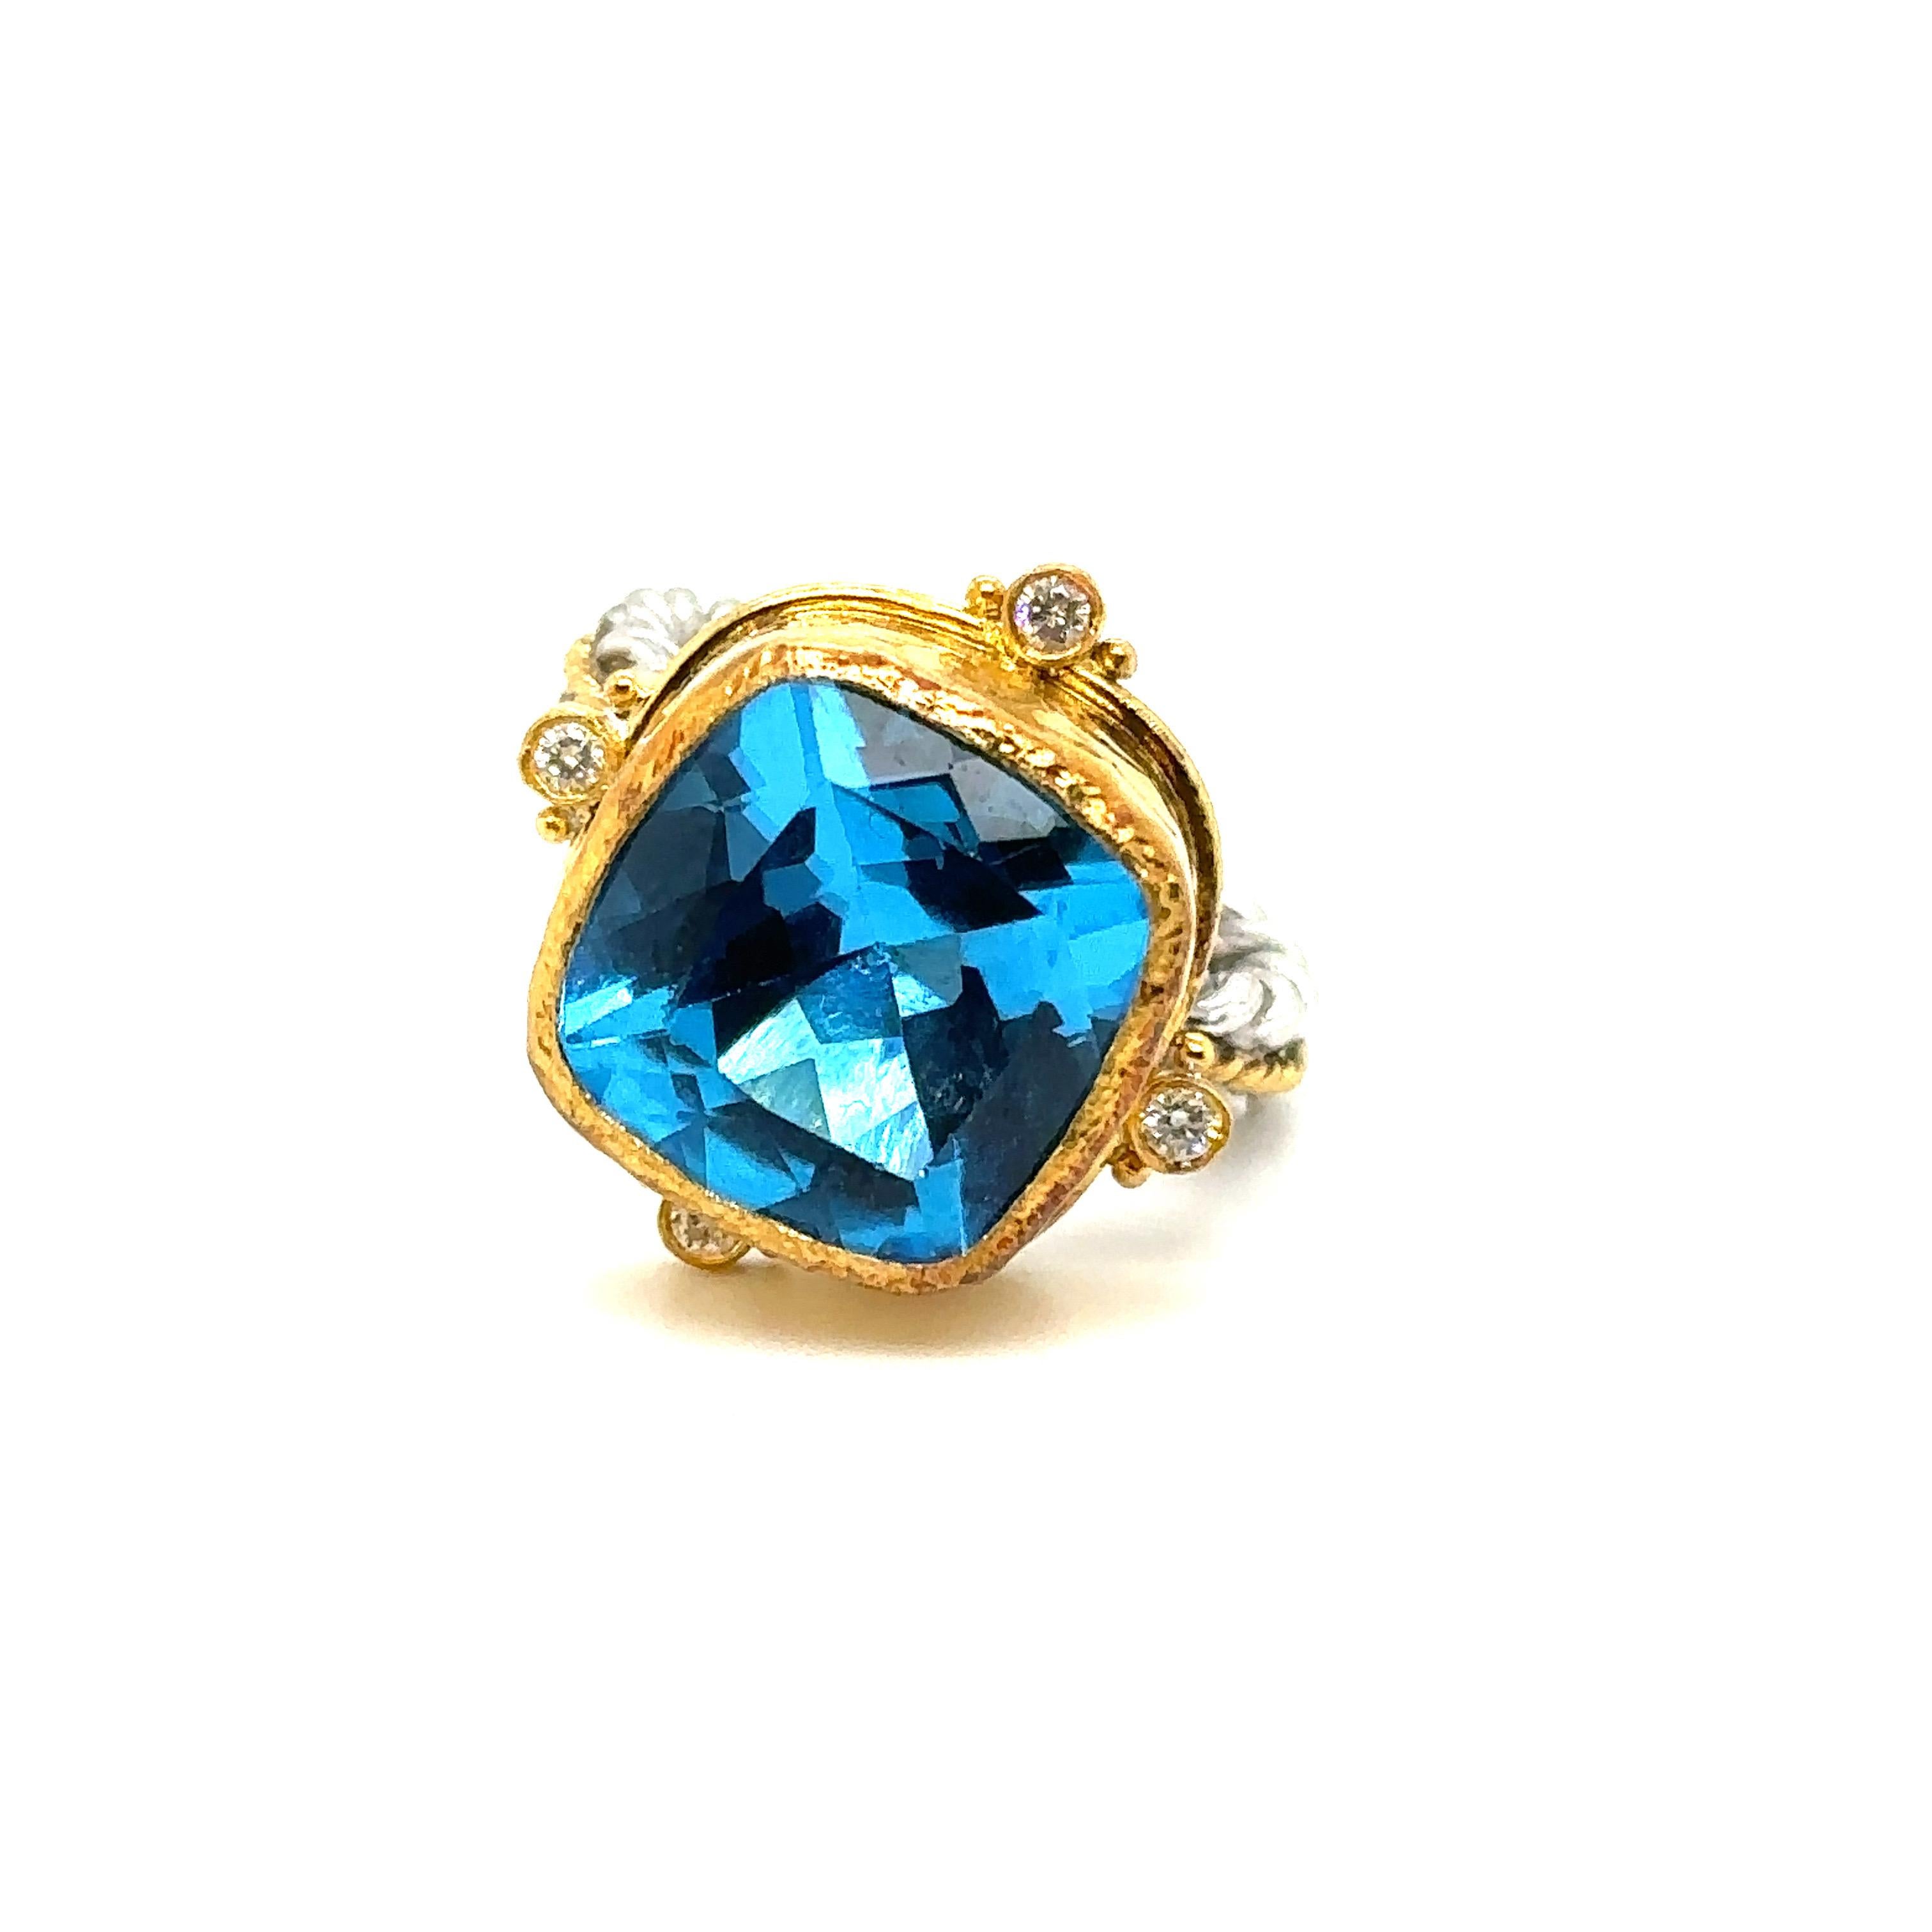 24K GOLD/STERLING SILVER RING 0.10Ct DIAS. 
Metal: 24K GOLD/SS
Diamond Info: H/I COLOR VS2-3 DIAMONDS
Stone Info: 14MM CUSHION CUT SWISS BLUE TOPAZ 12.50CT
Total Diamond Weight: 0.10 cwt.
Item Weight: 10.90 gm
Ring Size: 7 (Not